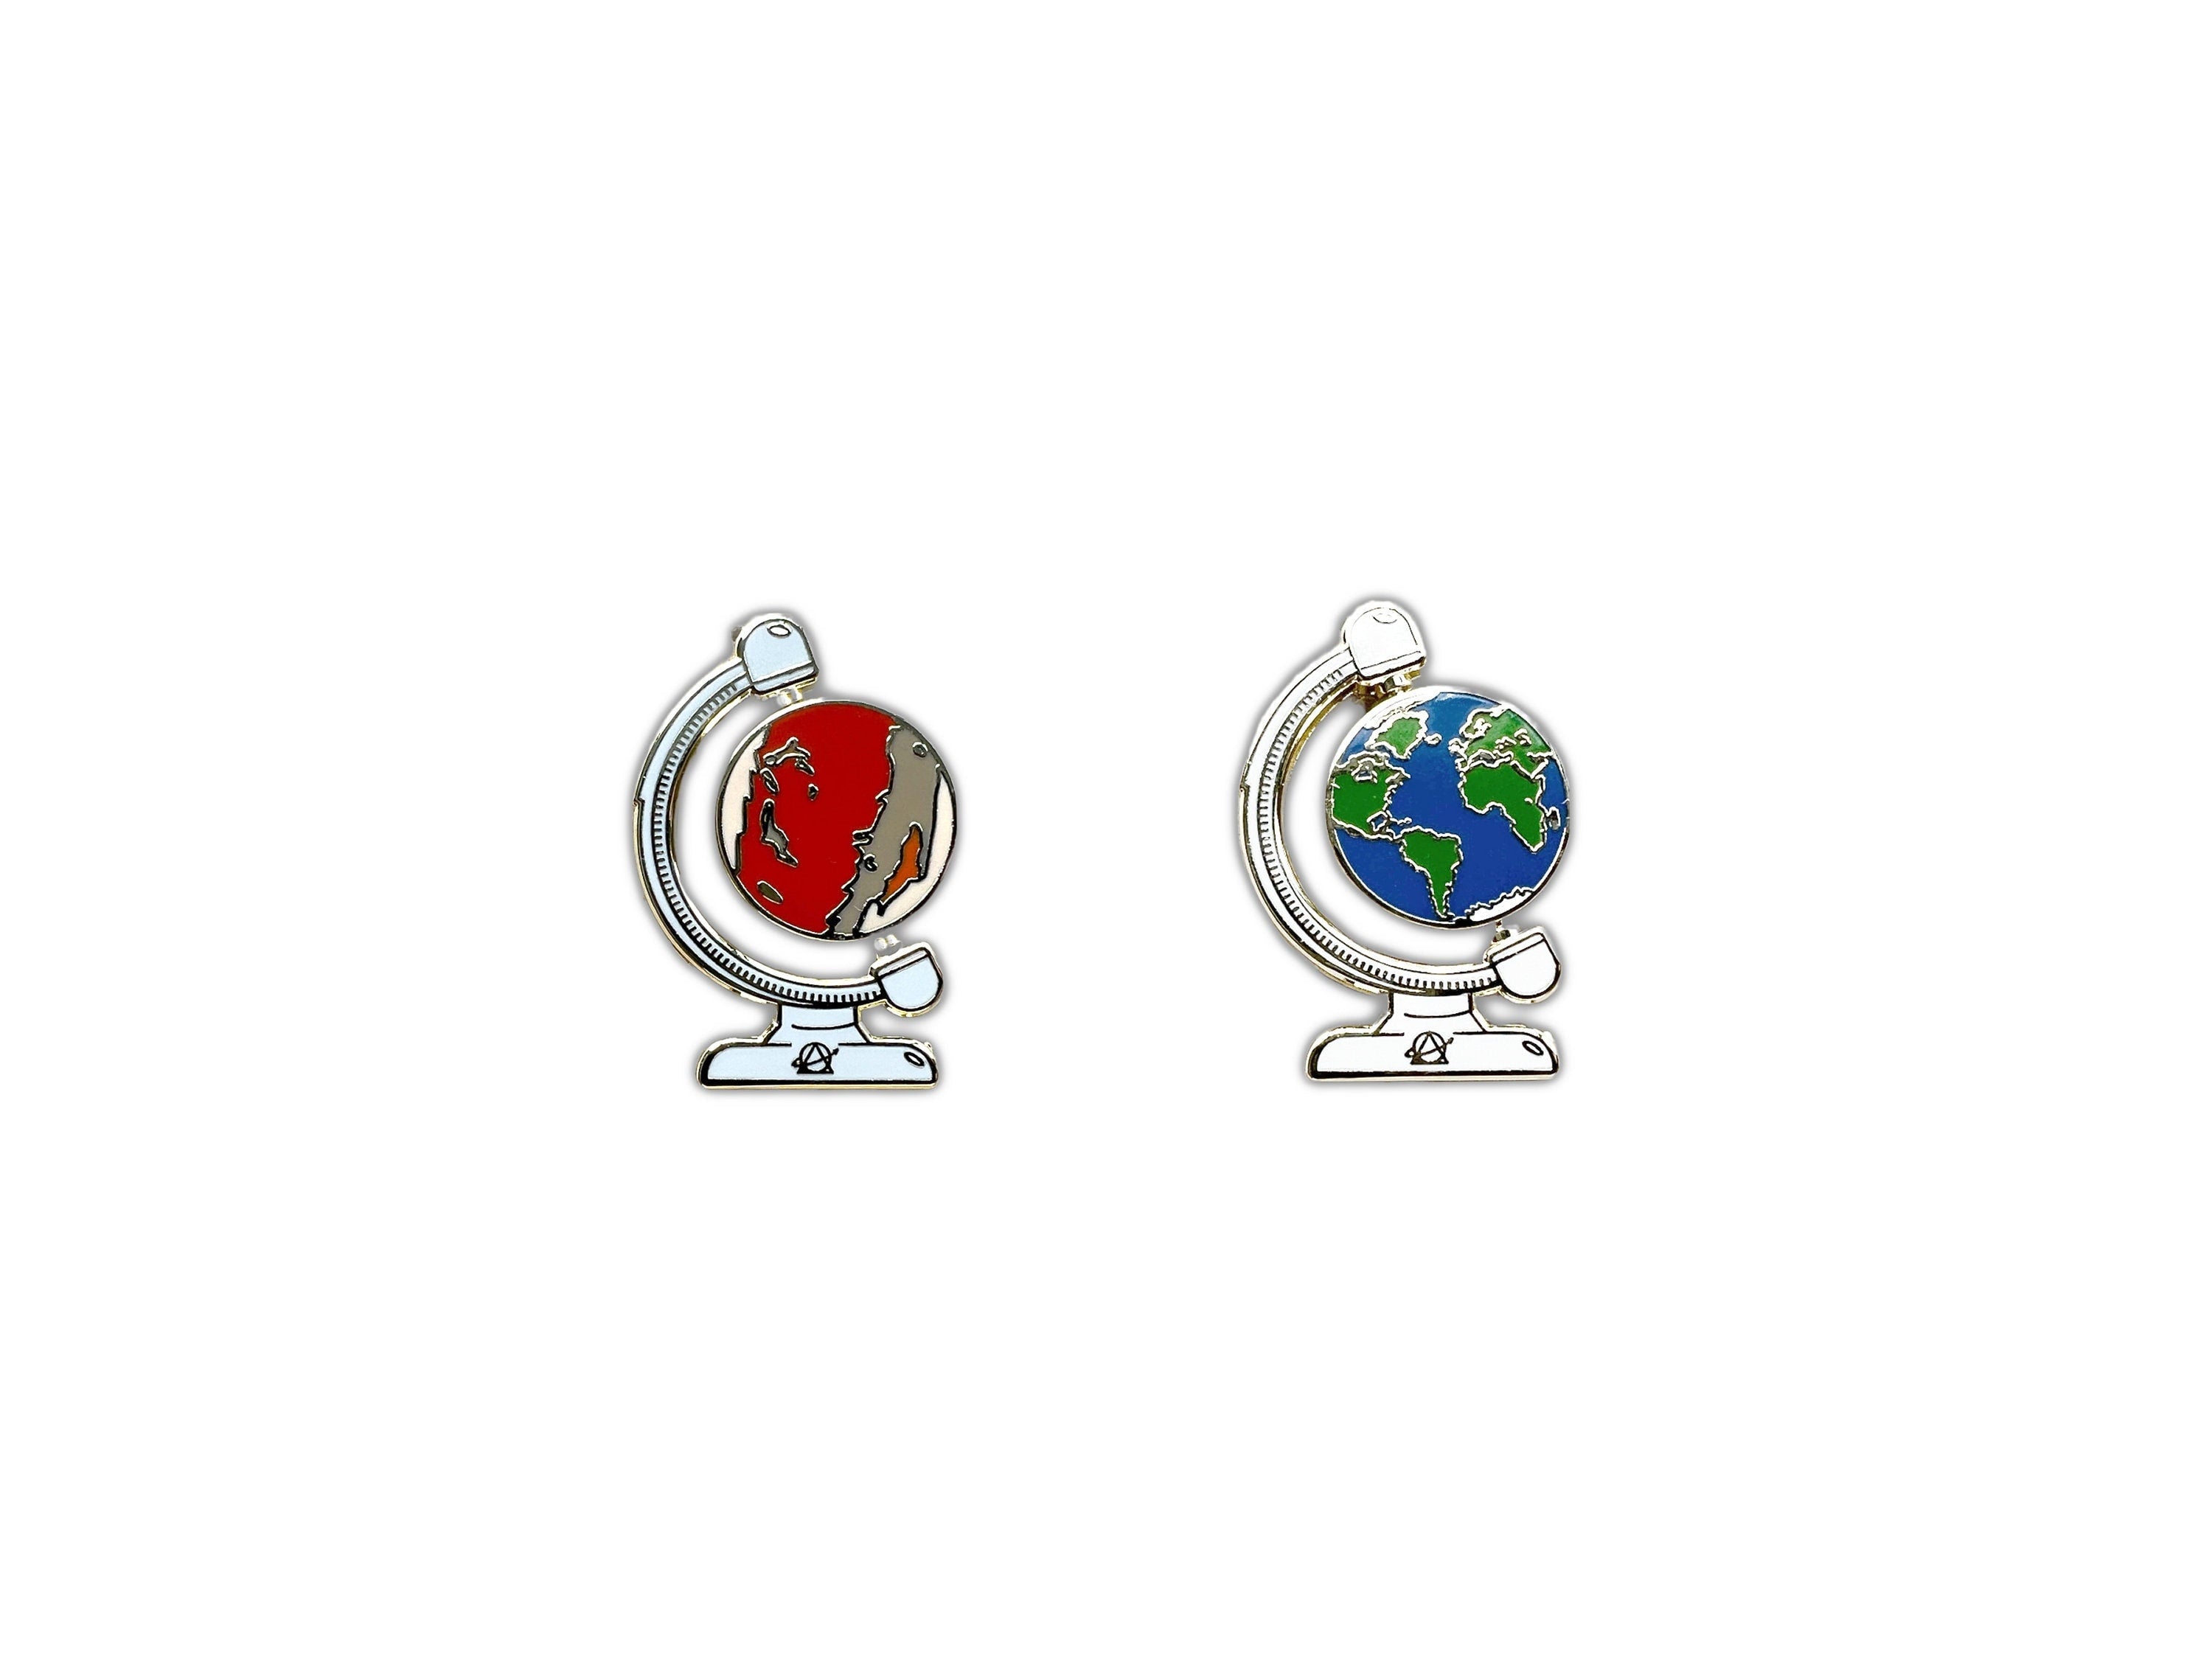 Earth-Mars Globe Spinner Pin - Outer space Enamel Pin - Interactive Astronomy / Stars Lapel Pin